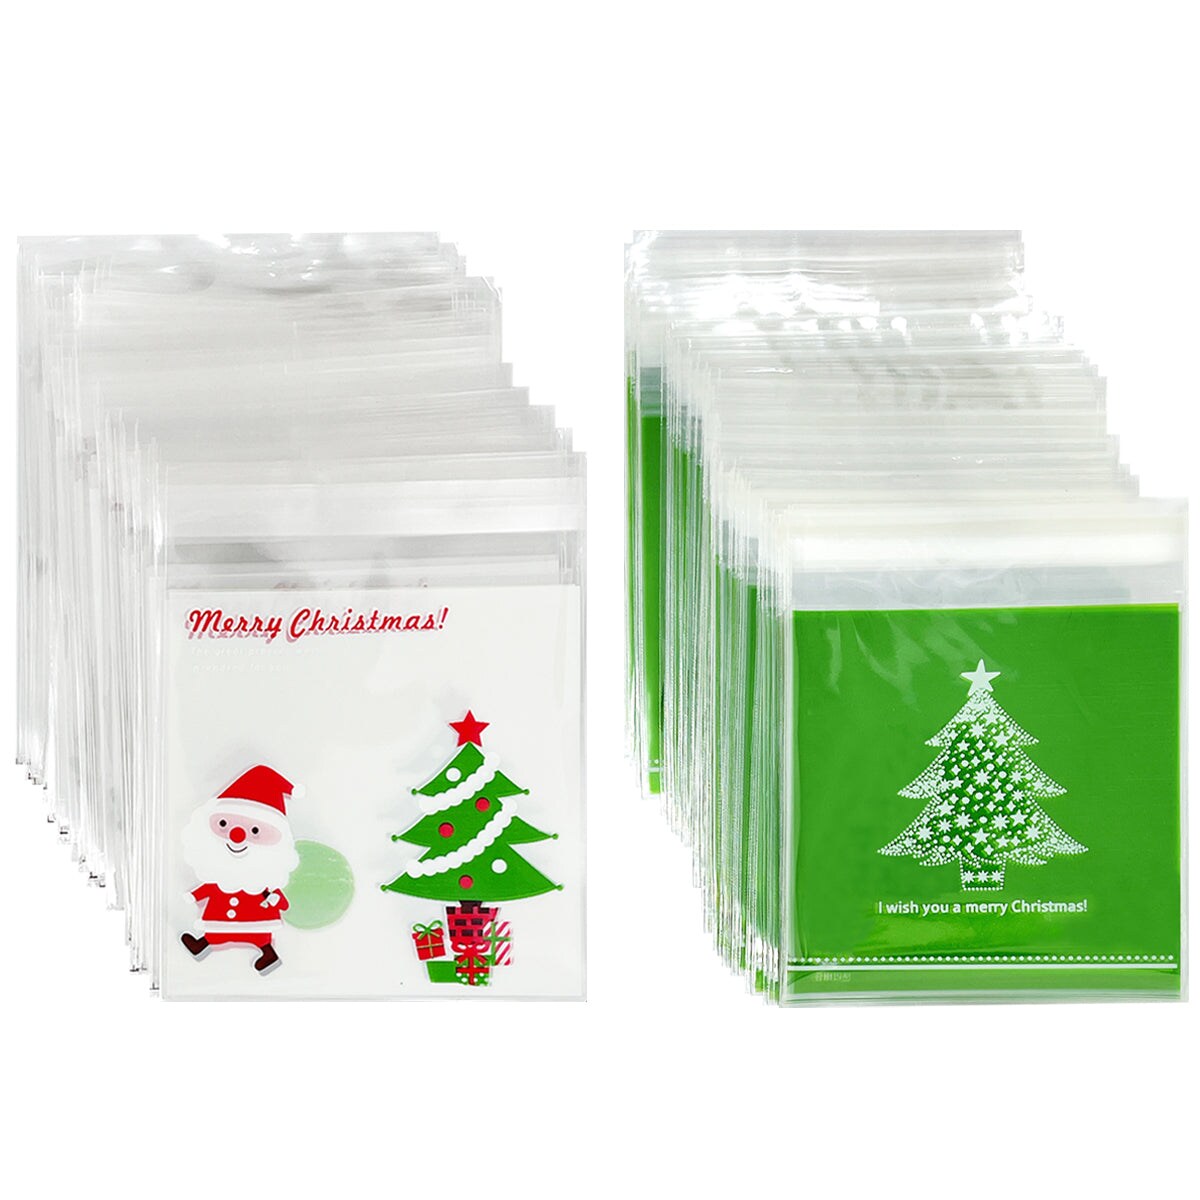 Wrapables Transparent Self-Adhesive 4" x 4" Candy and Cookie Bags, Favor Treat Bags for Christmas Parties and Holidays (200pcs)